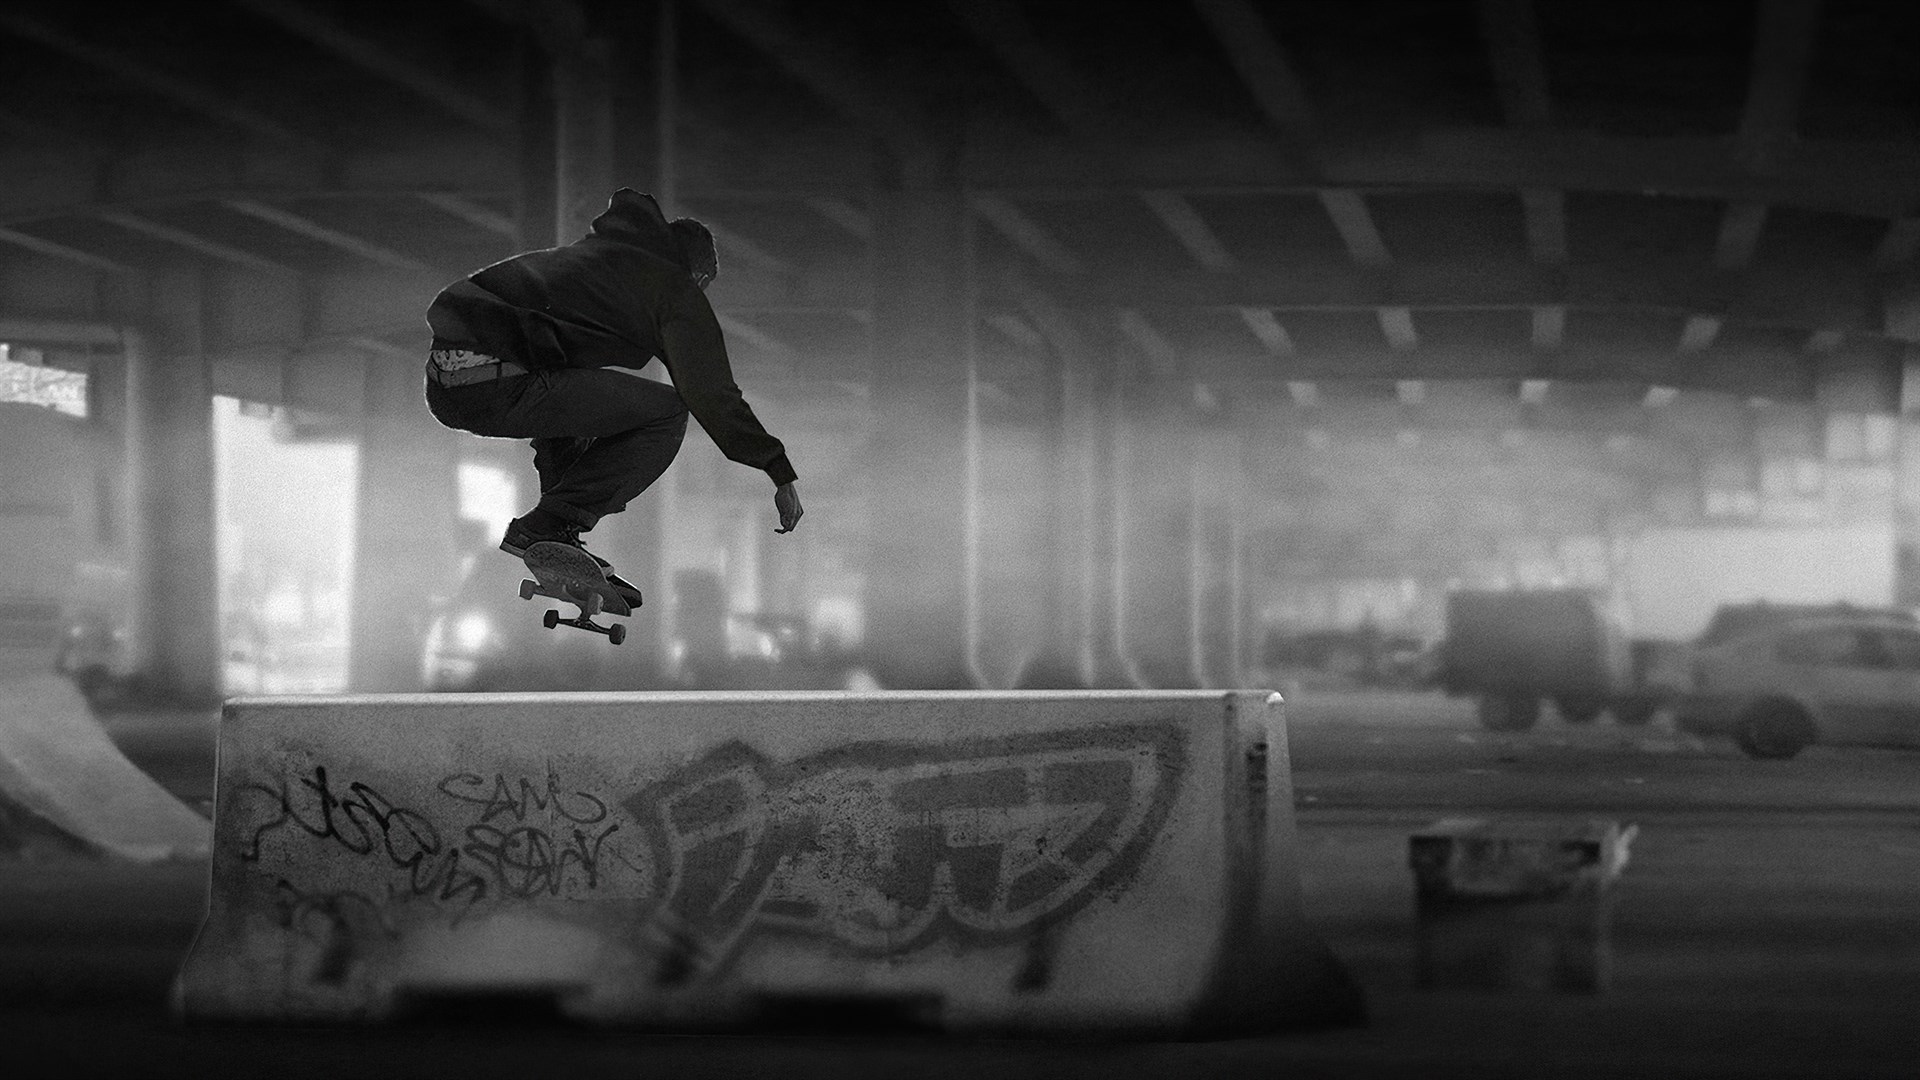 Buy Session: Skateboarding Sim Game (Game Preview) - Microsoft Store